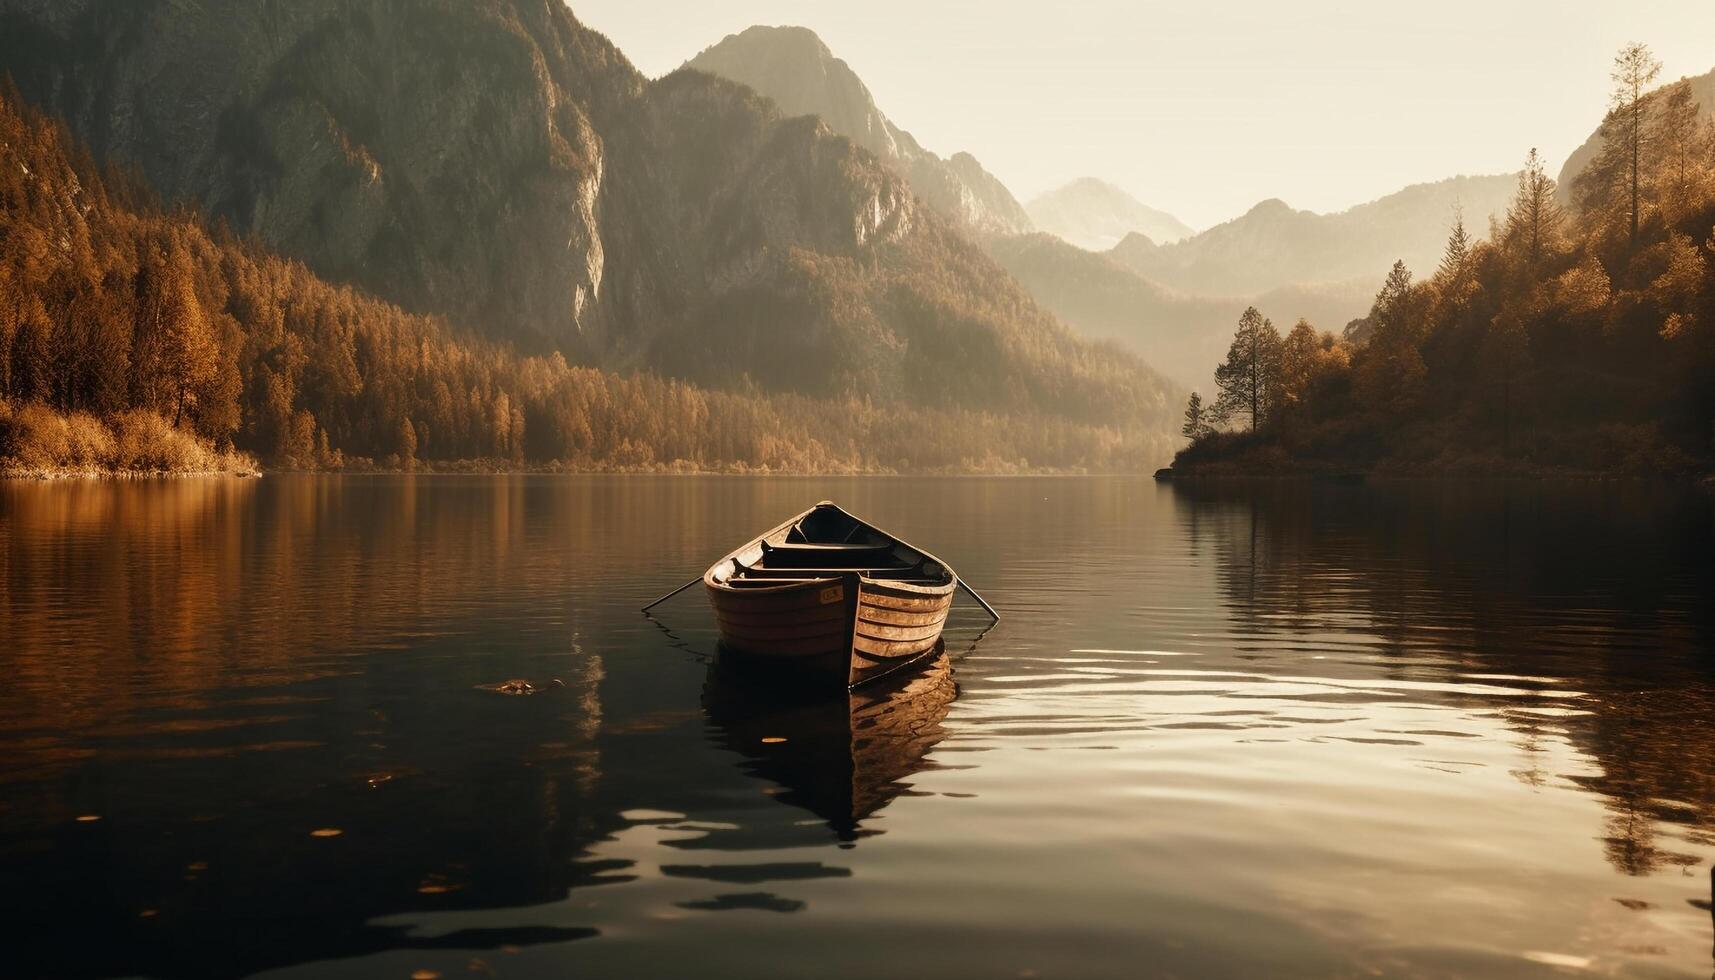 A tranquil scene of a rowboat on a foggy lake generated by AI photo